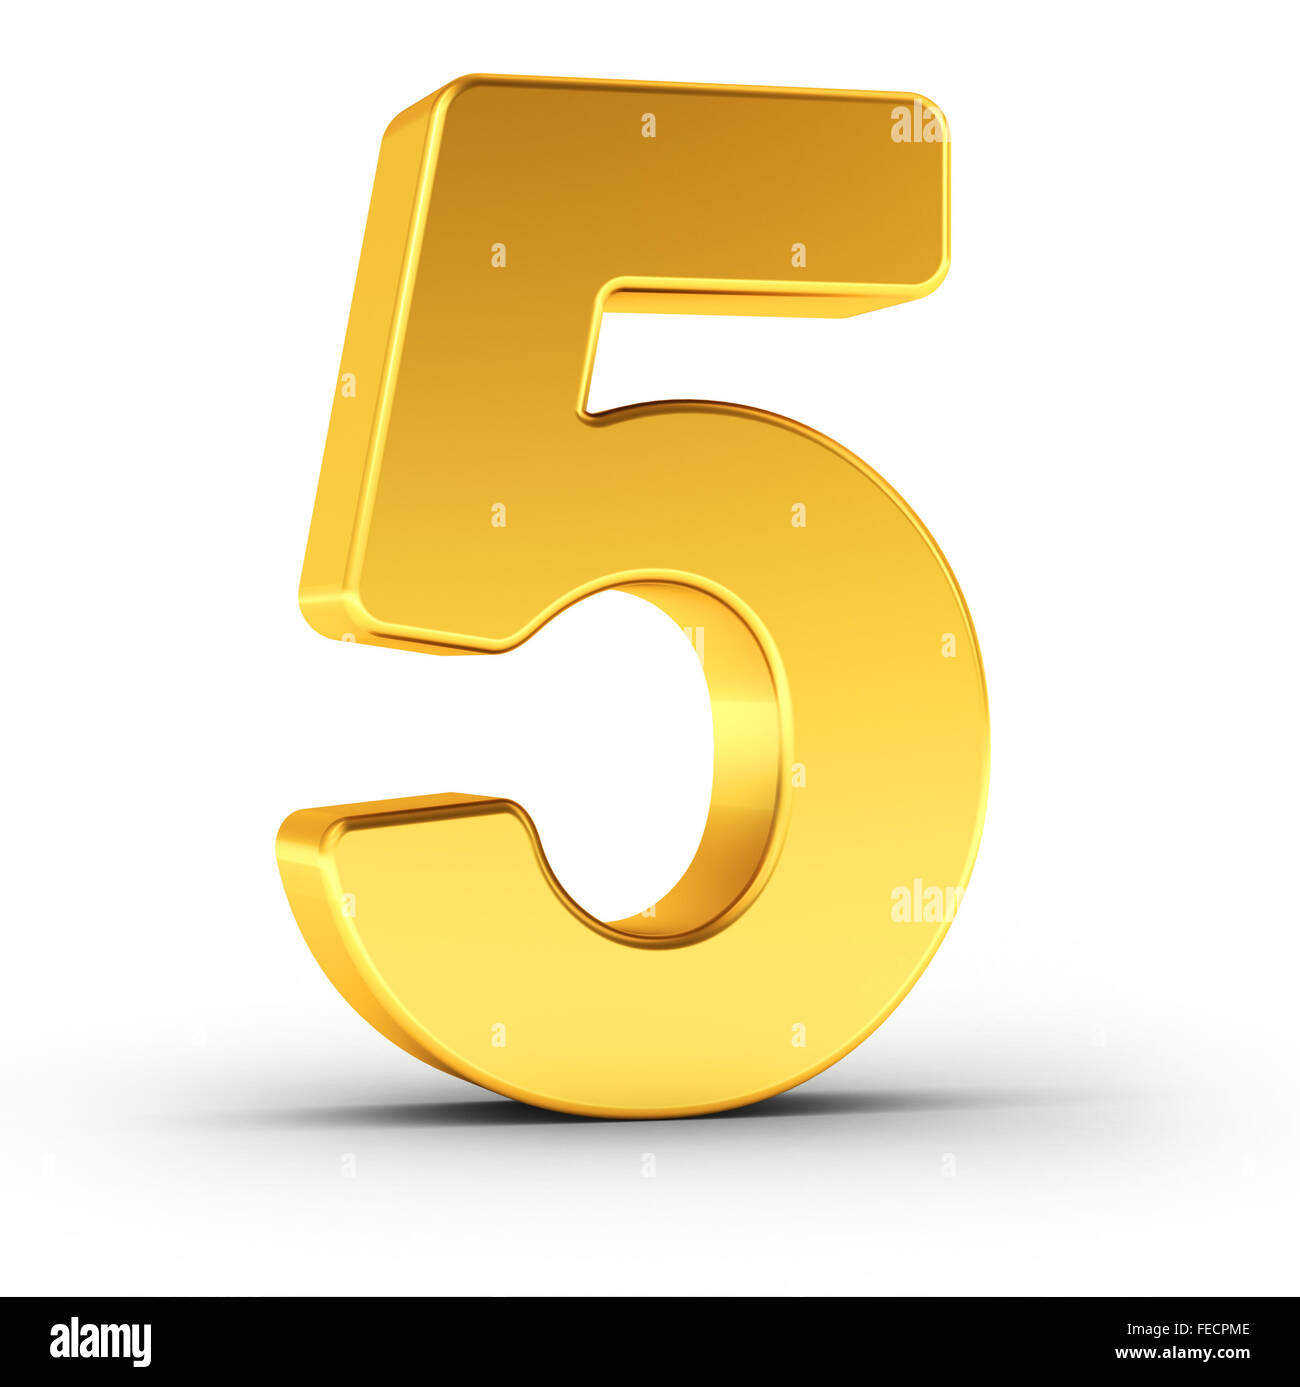 The number five as a polished golden object Stock Photo